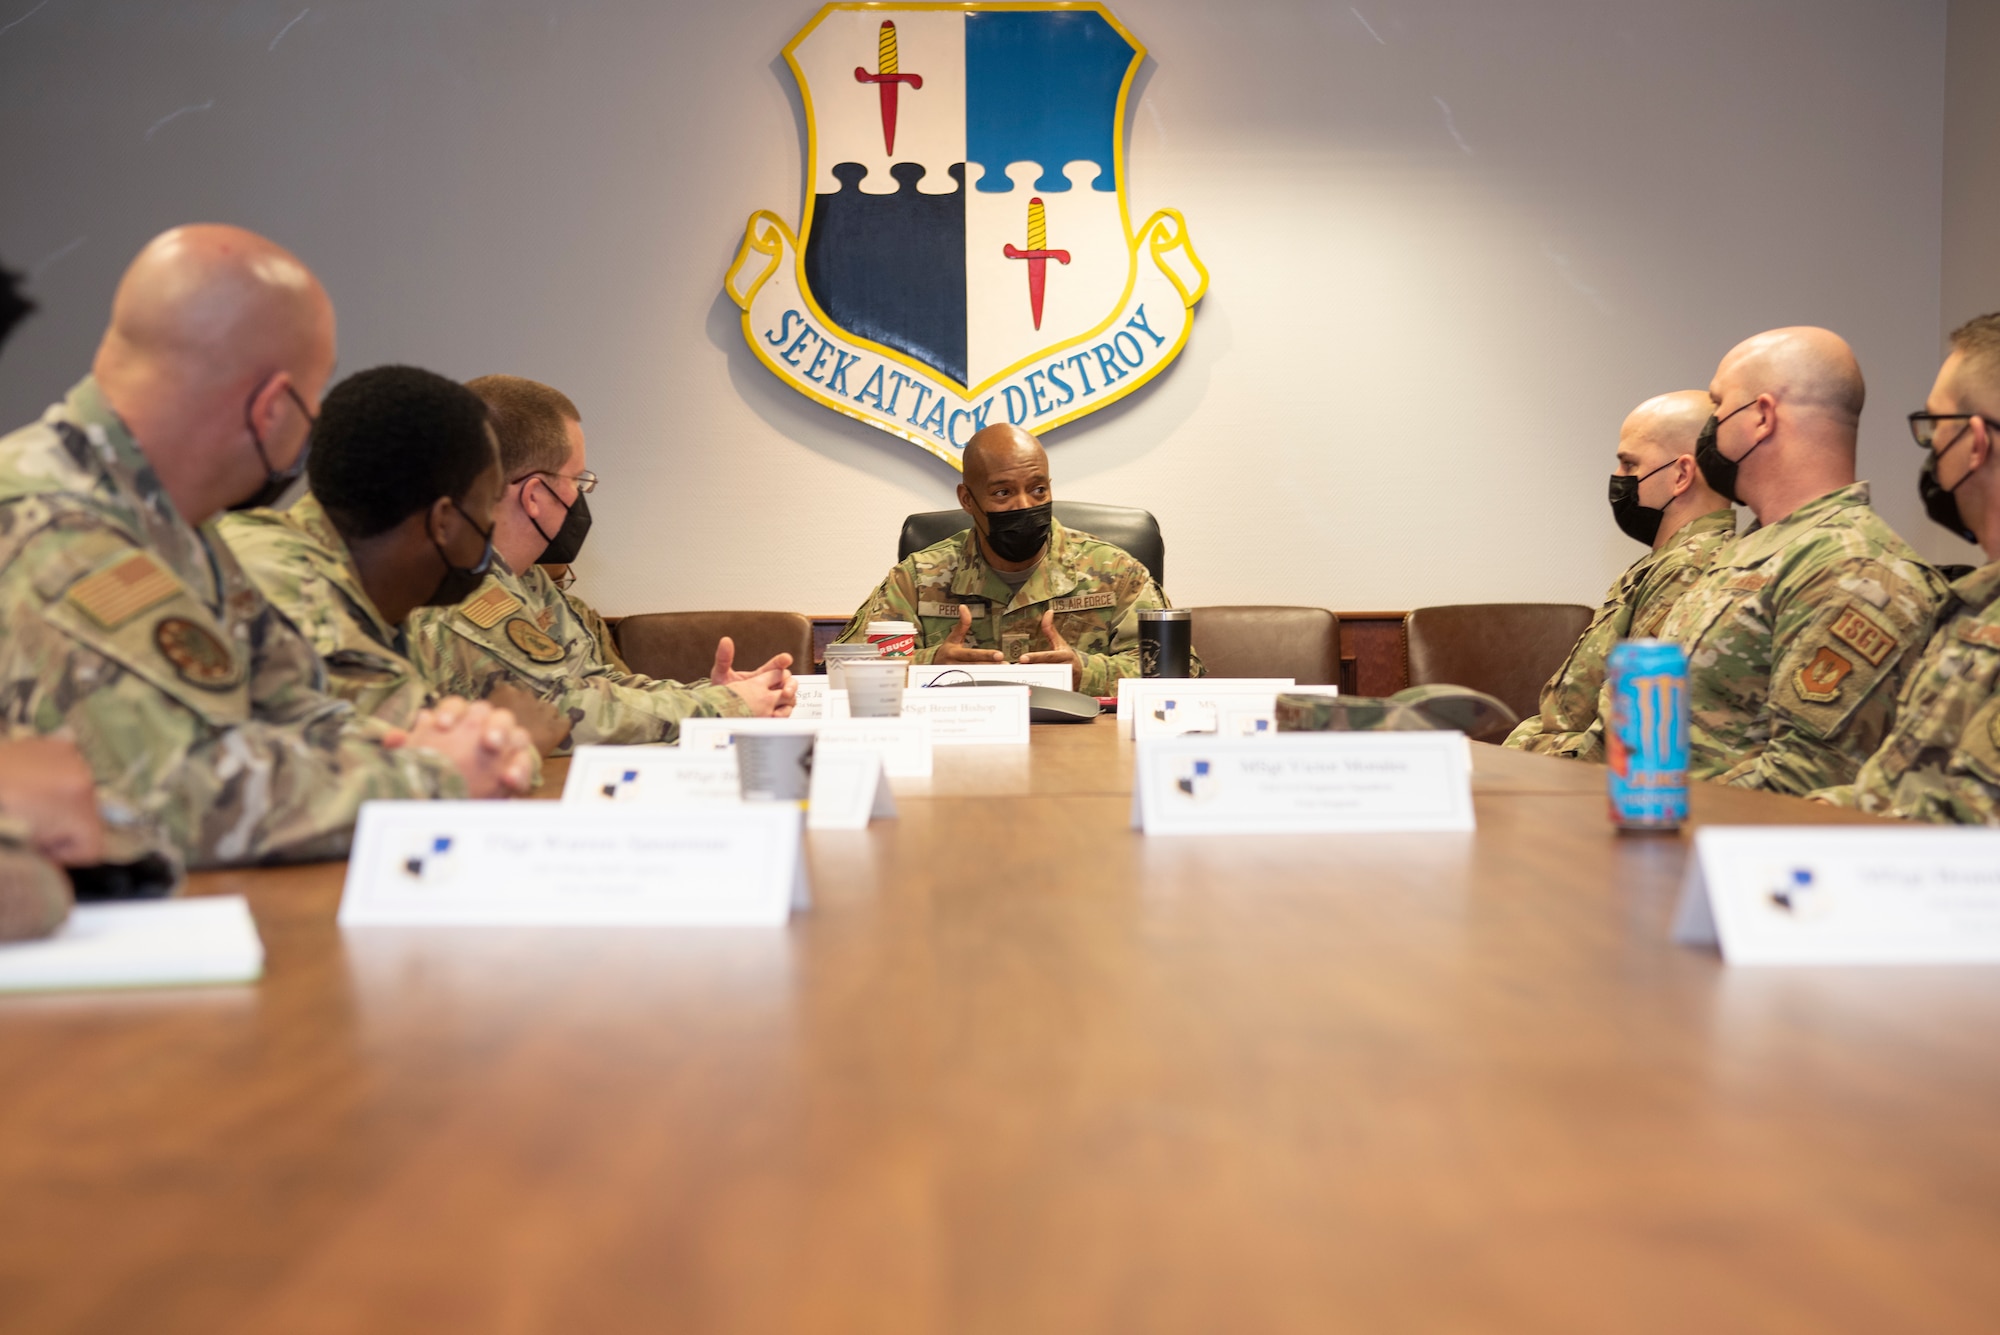 U.S. Air Force Chief Master Sgt. Mike Perry, Air Force first sergeant special duty manager, center, gathers with 52nd Fighter Wing first sergeants in a conference room, Dec. 2, 2021, on Spangdahlem Air Base, Germany. First sergeants are dedicated focal points for all readiness, health, morale, welfare and quality of life issues within their organizations. At home station and in expeditionary environments, their primary responsibility is to build and maintain a mission-ready force. (U.S. Air Force photo by Airman 1st Class Marcus Hardy-Bannerman)